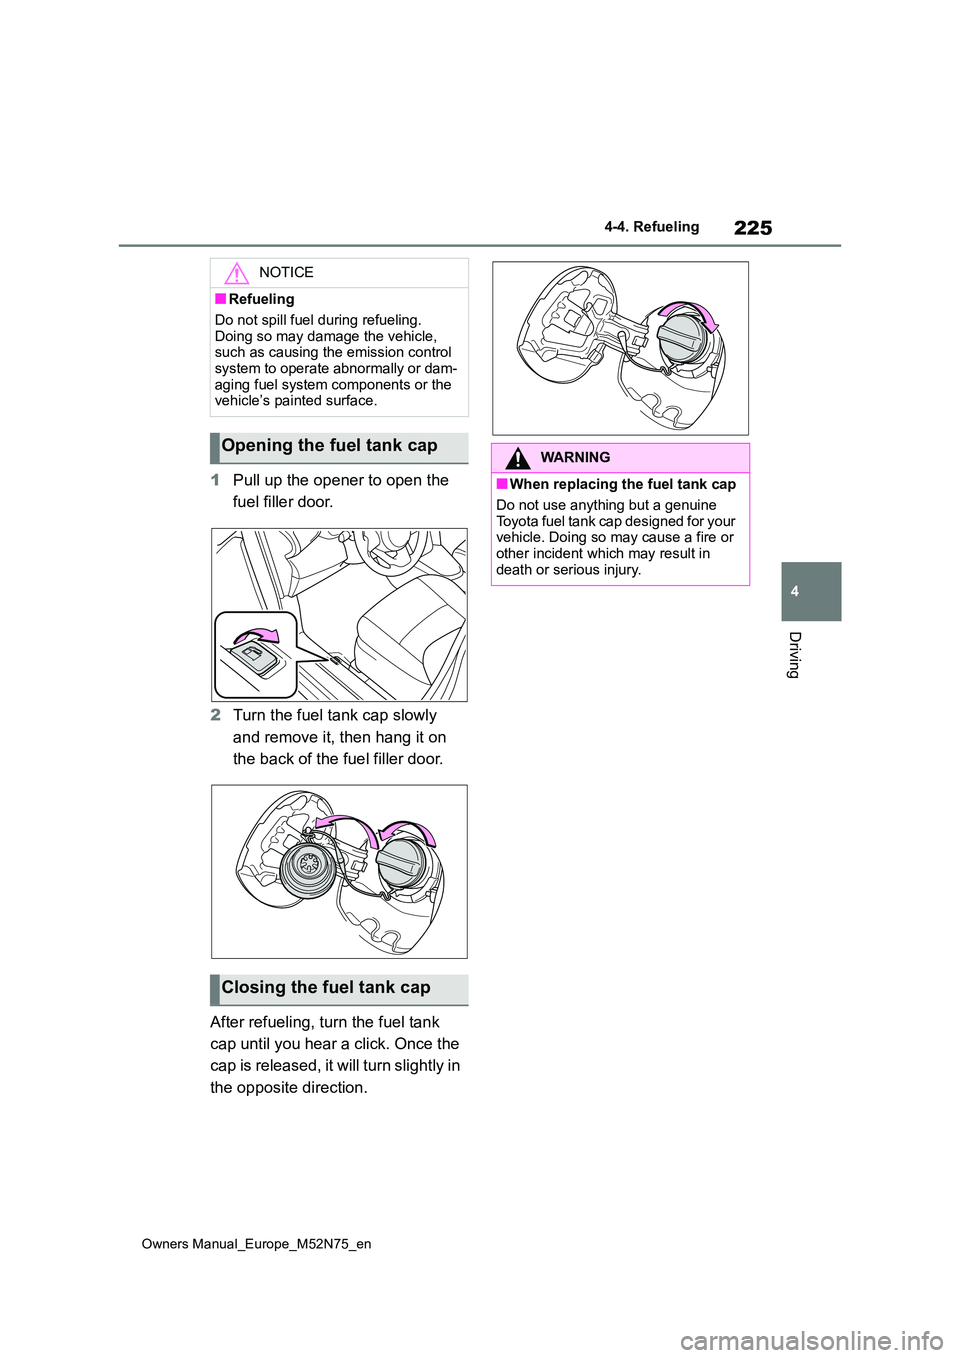 TOYOTA YARIS CROSS 2023  Owners Manual 225
4
Owners Manual_Europe_M52N75_en
4-4. Refueling
Driving
1Pull up the opener to open the  
fuel filler door. 
2 Turn the fuel tank cap slowly  
and remove it, then hang it on  
the back of the fuel